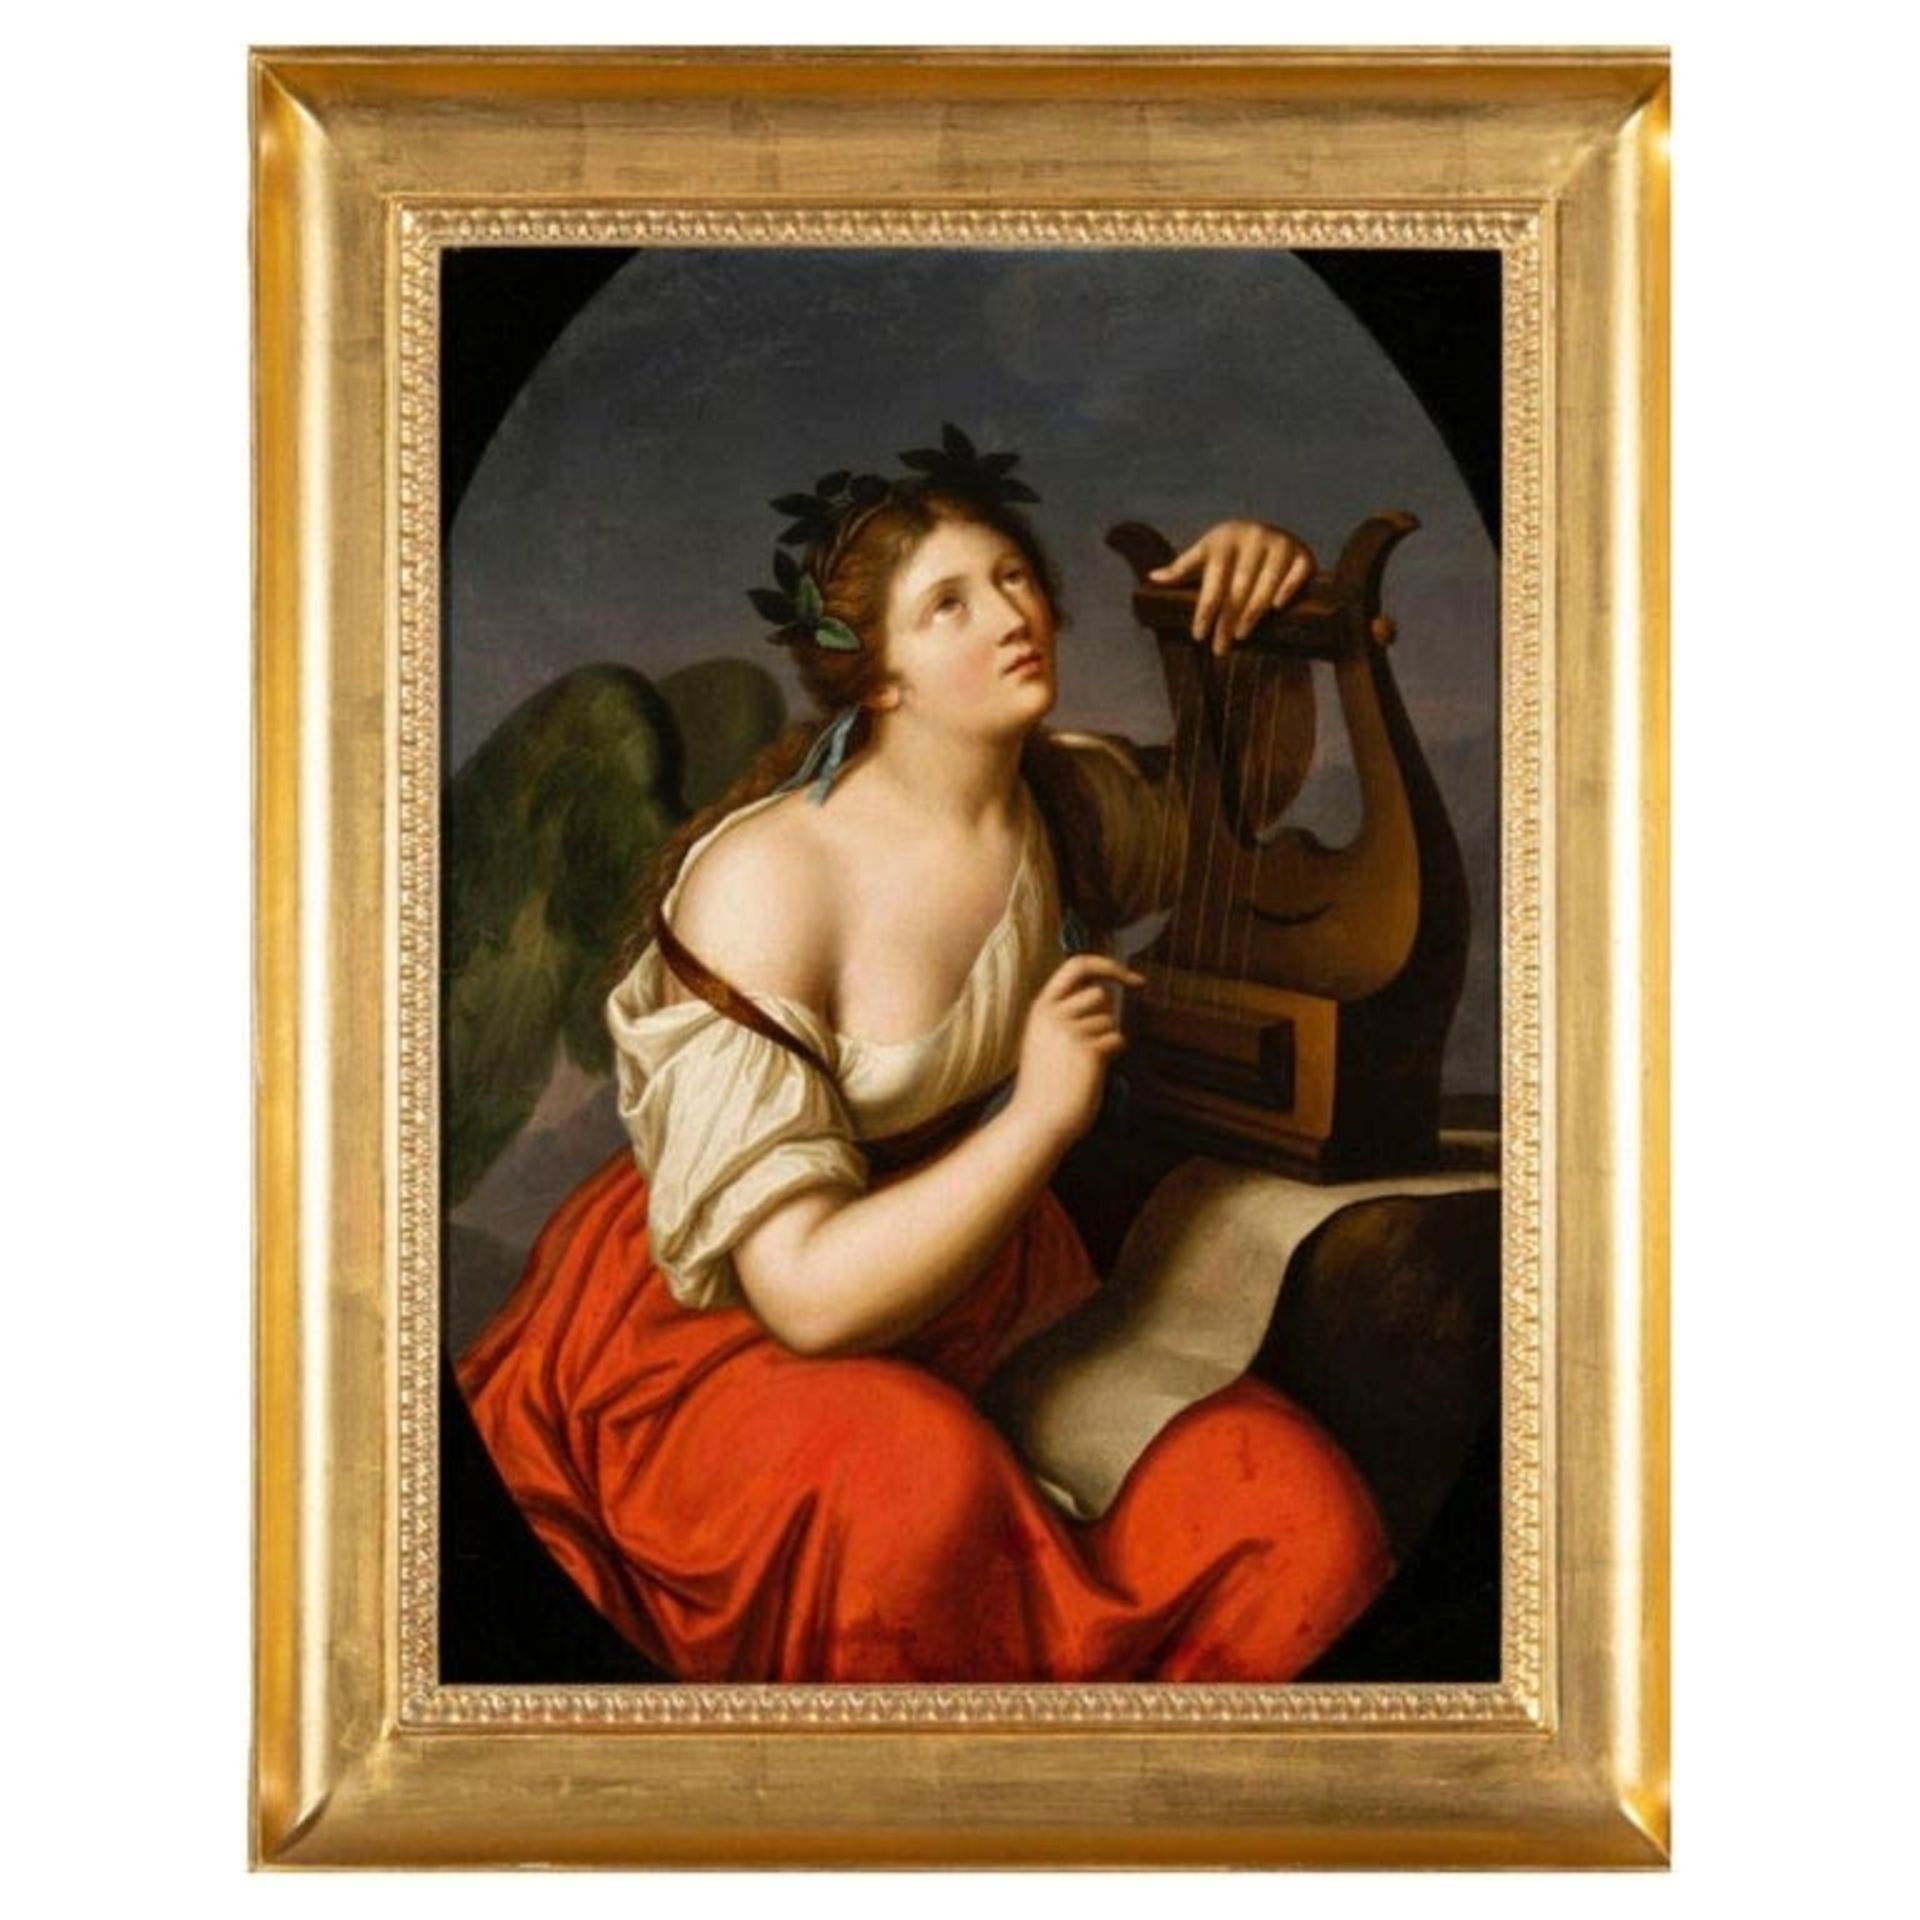 "Calliope." Important oil on canvas from the Italian school of the late 18th century "Allegory of po